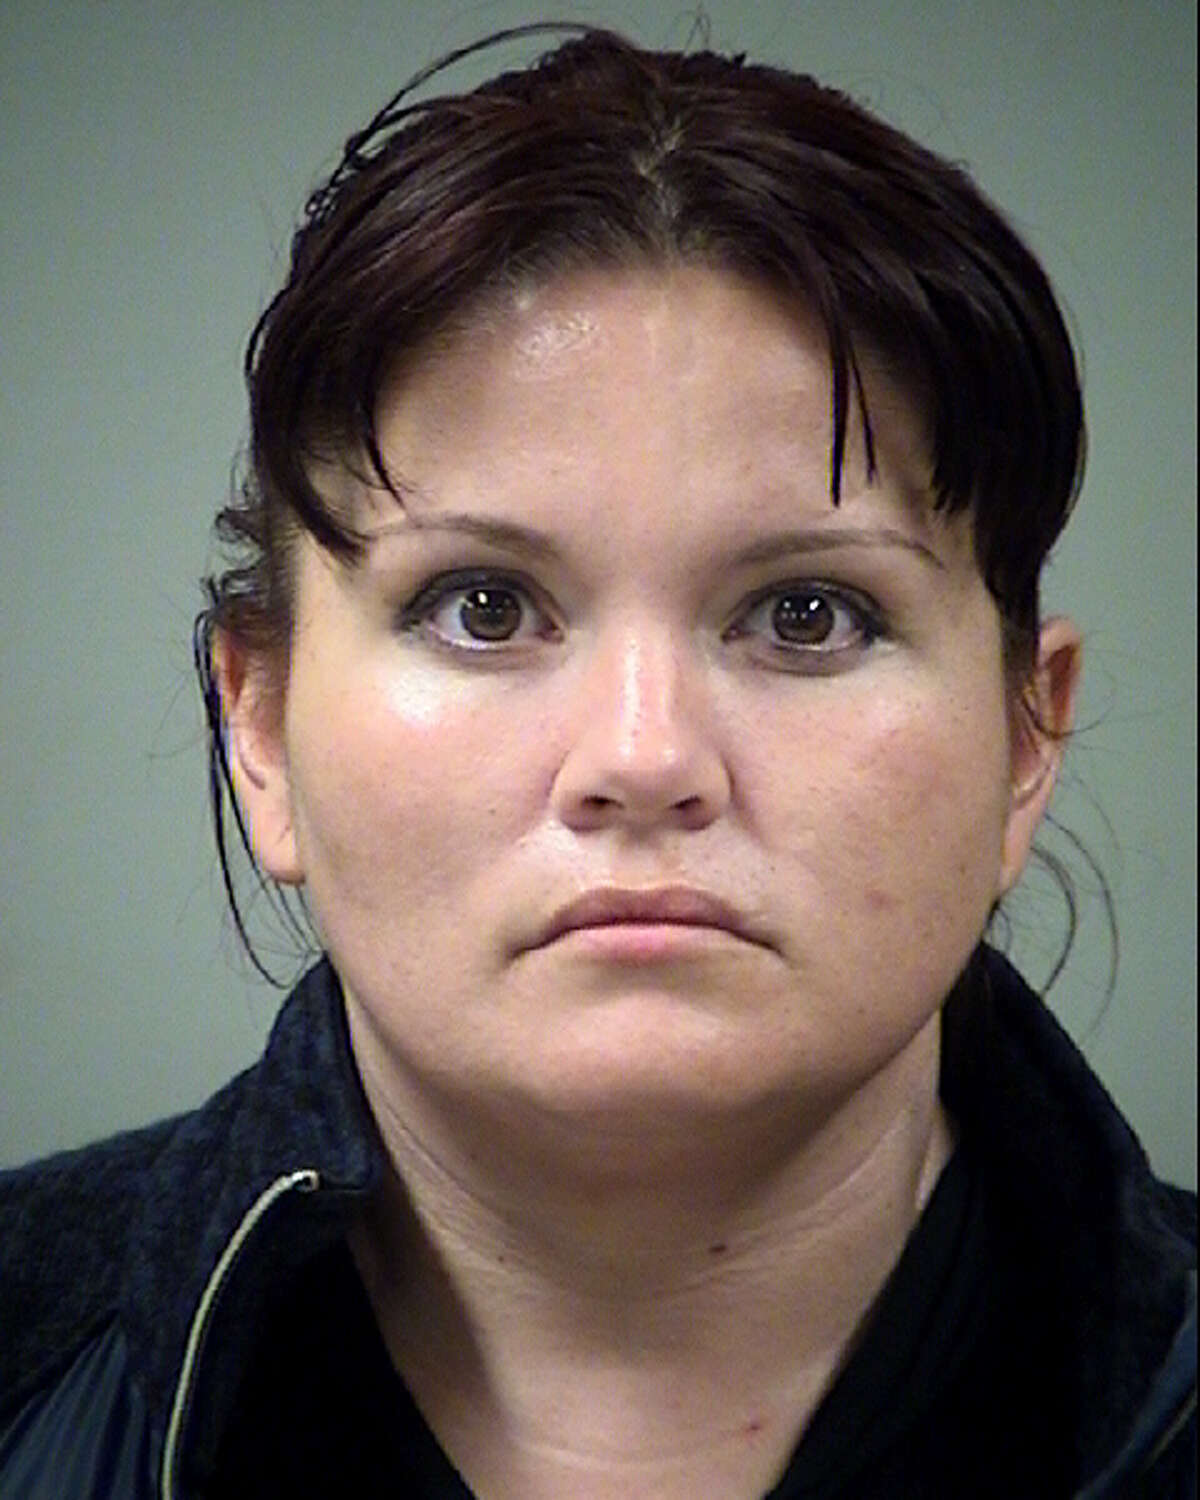 Melissa Woodard, 32, is charged with intoxication manslaughter and two counts of endangering a child.